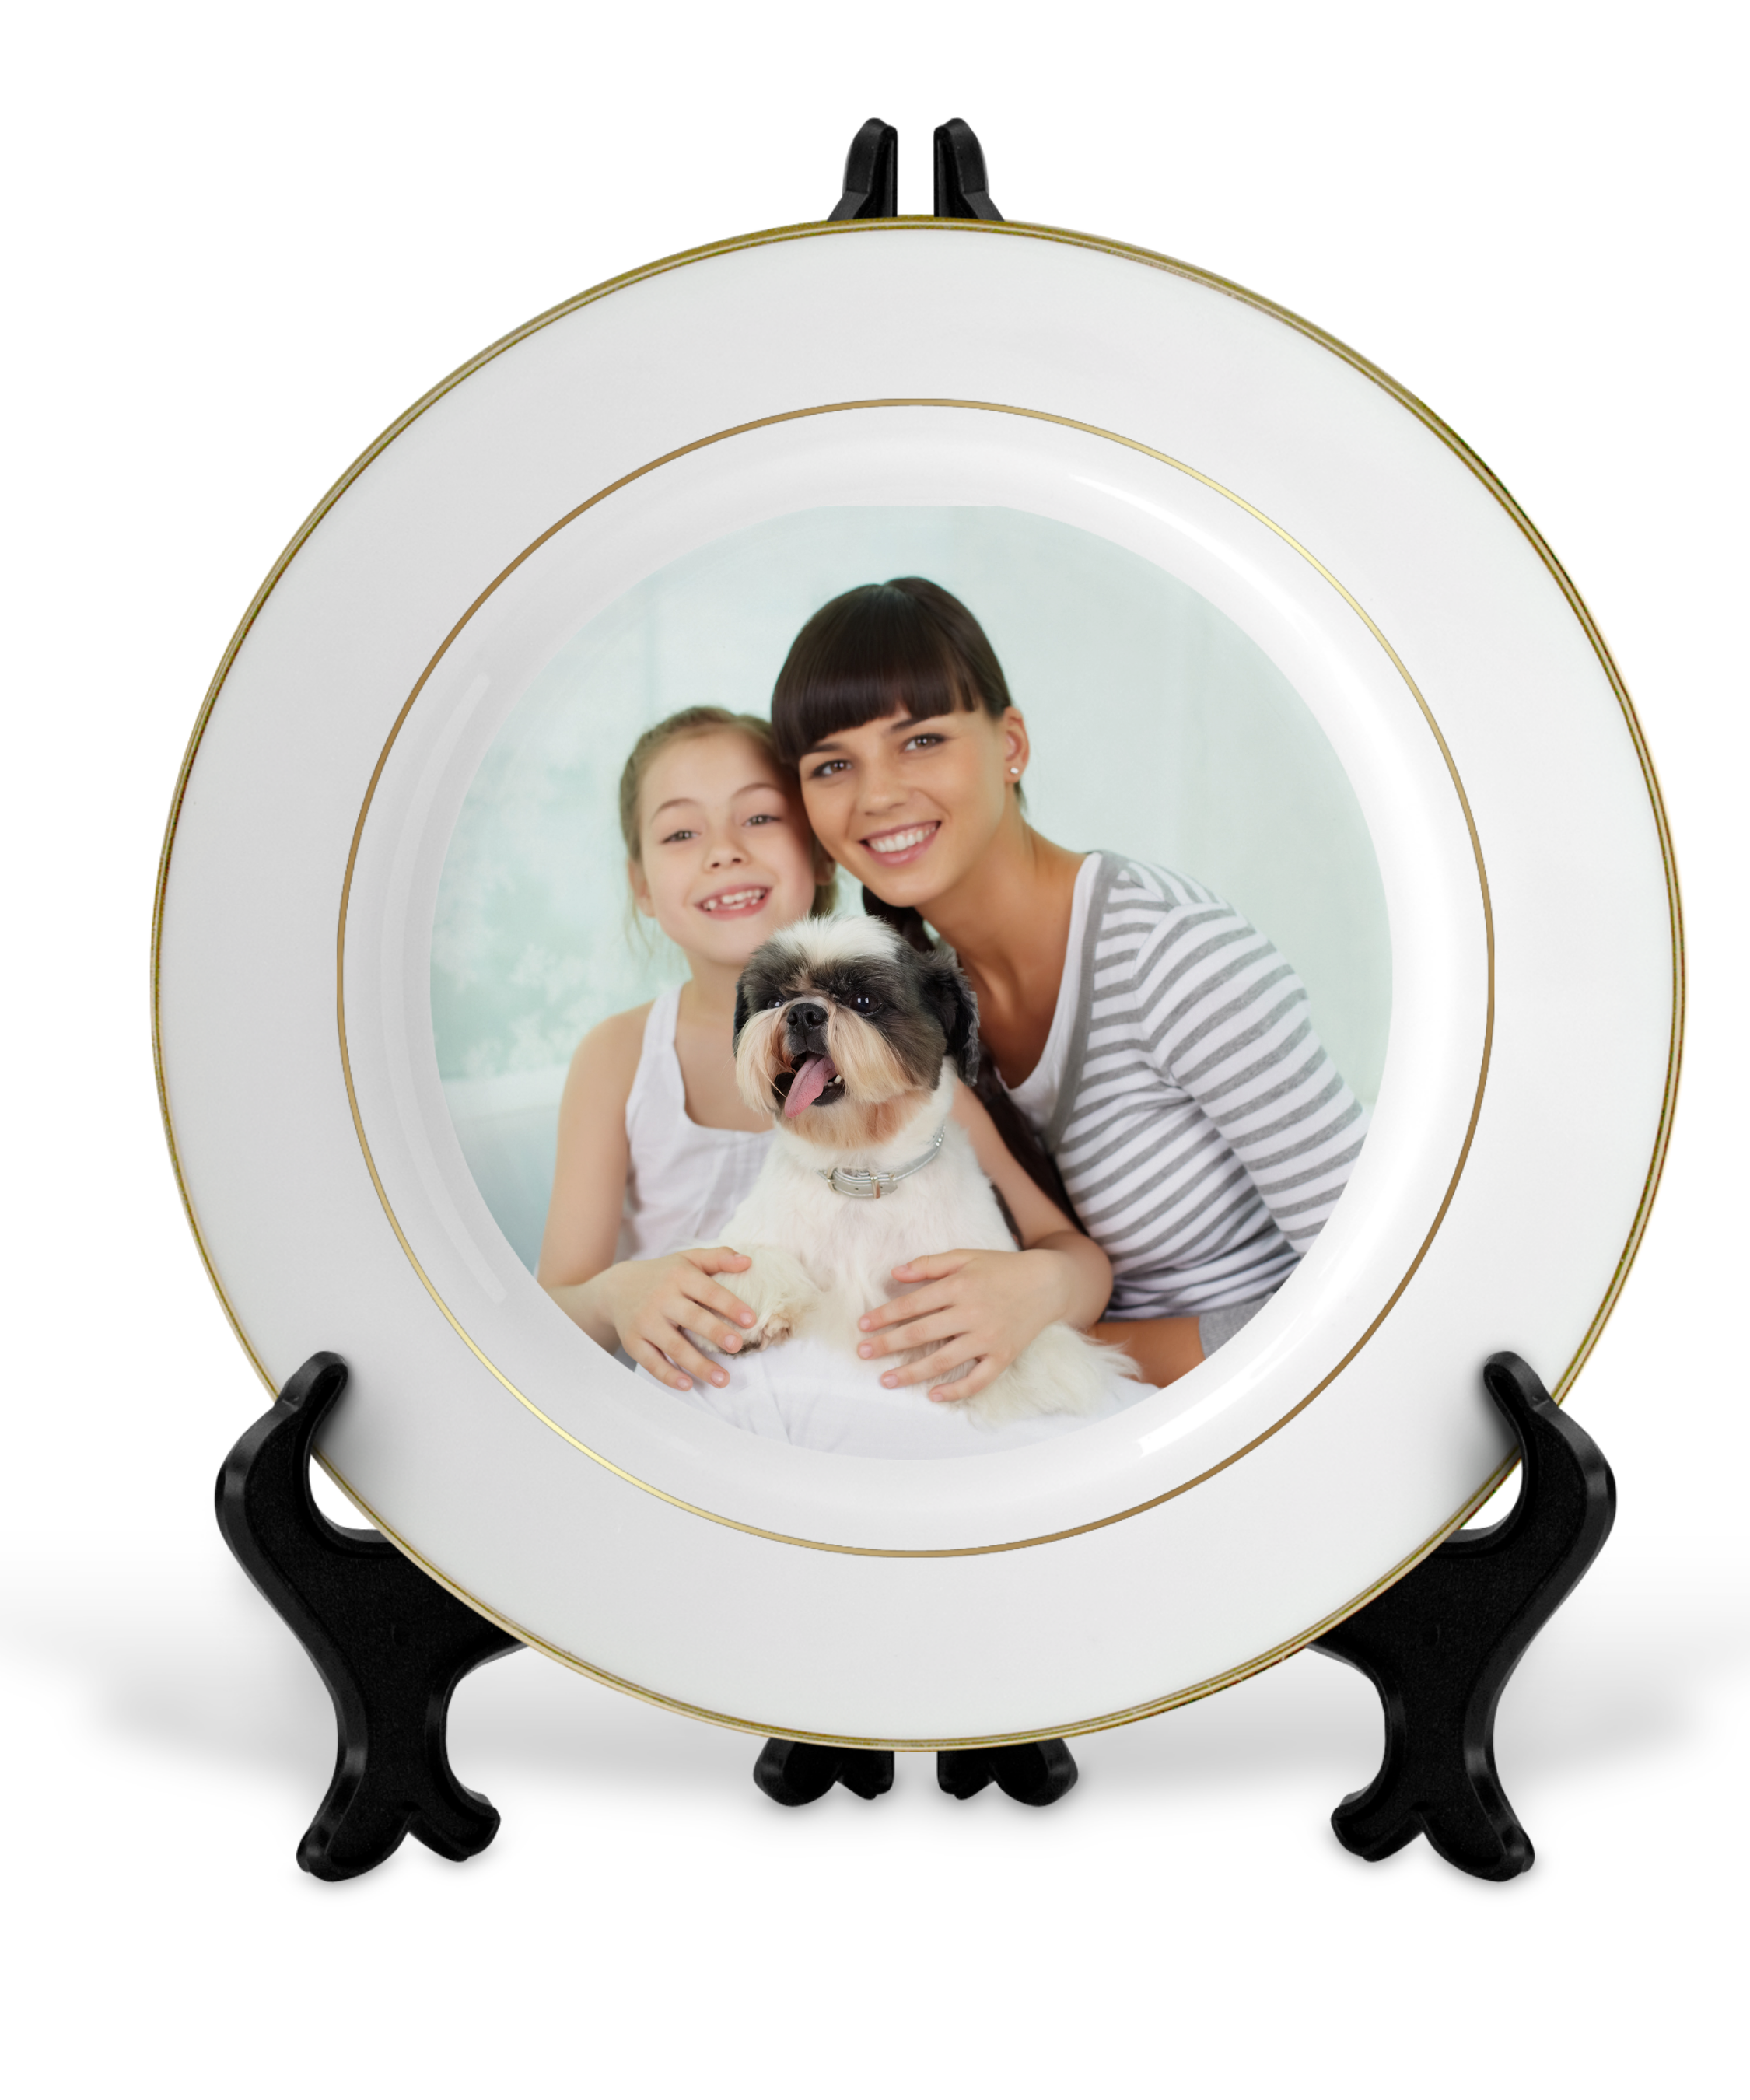 10.75 Sublimation Ceramic Plate with Gold Trim and Rim